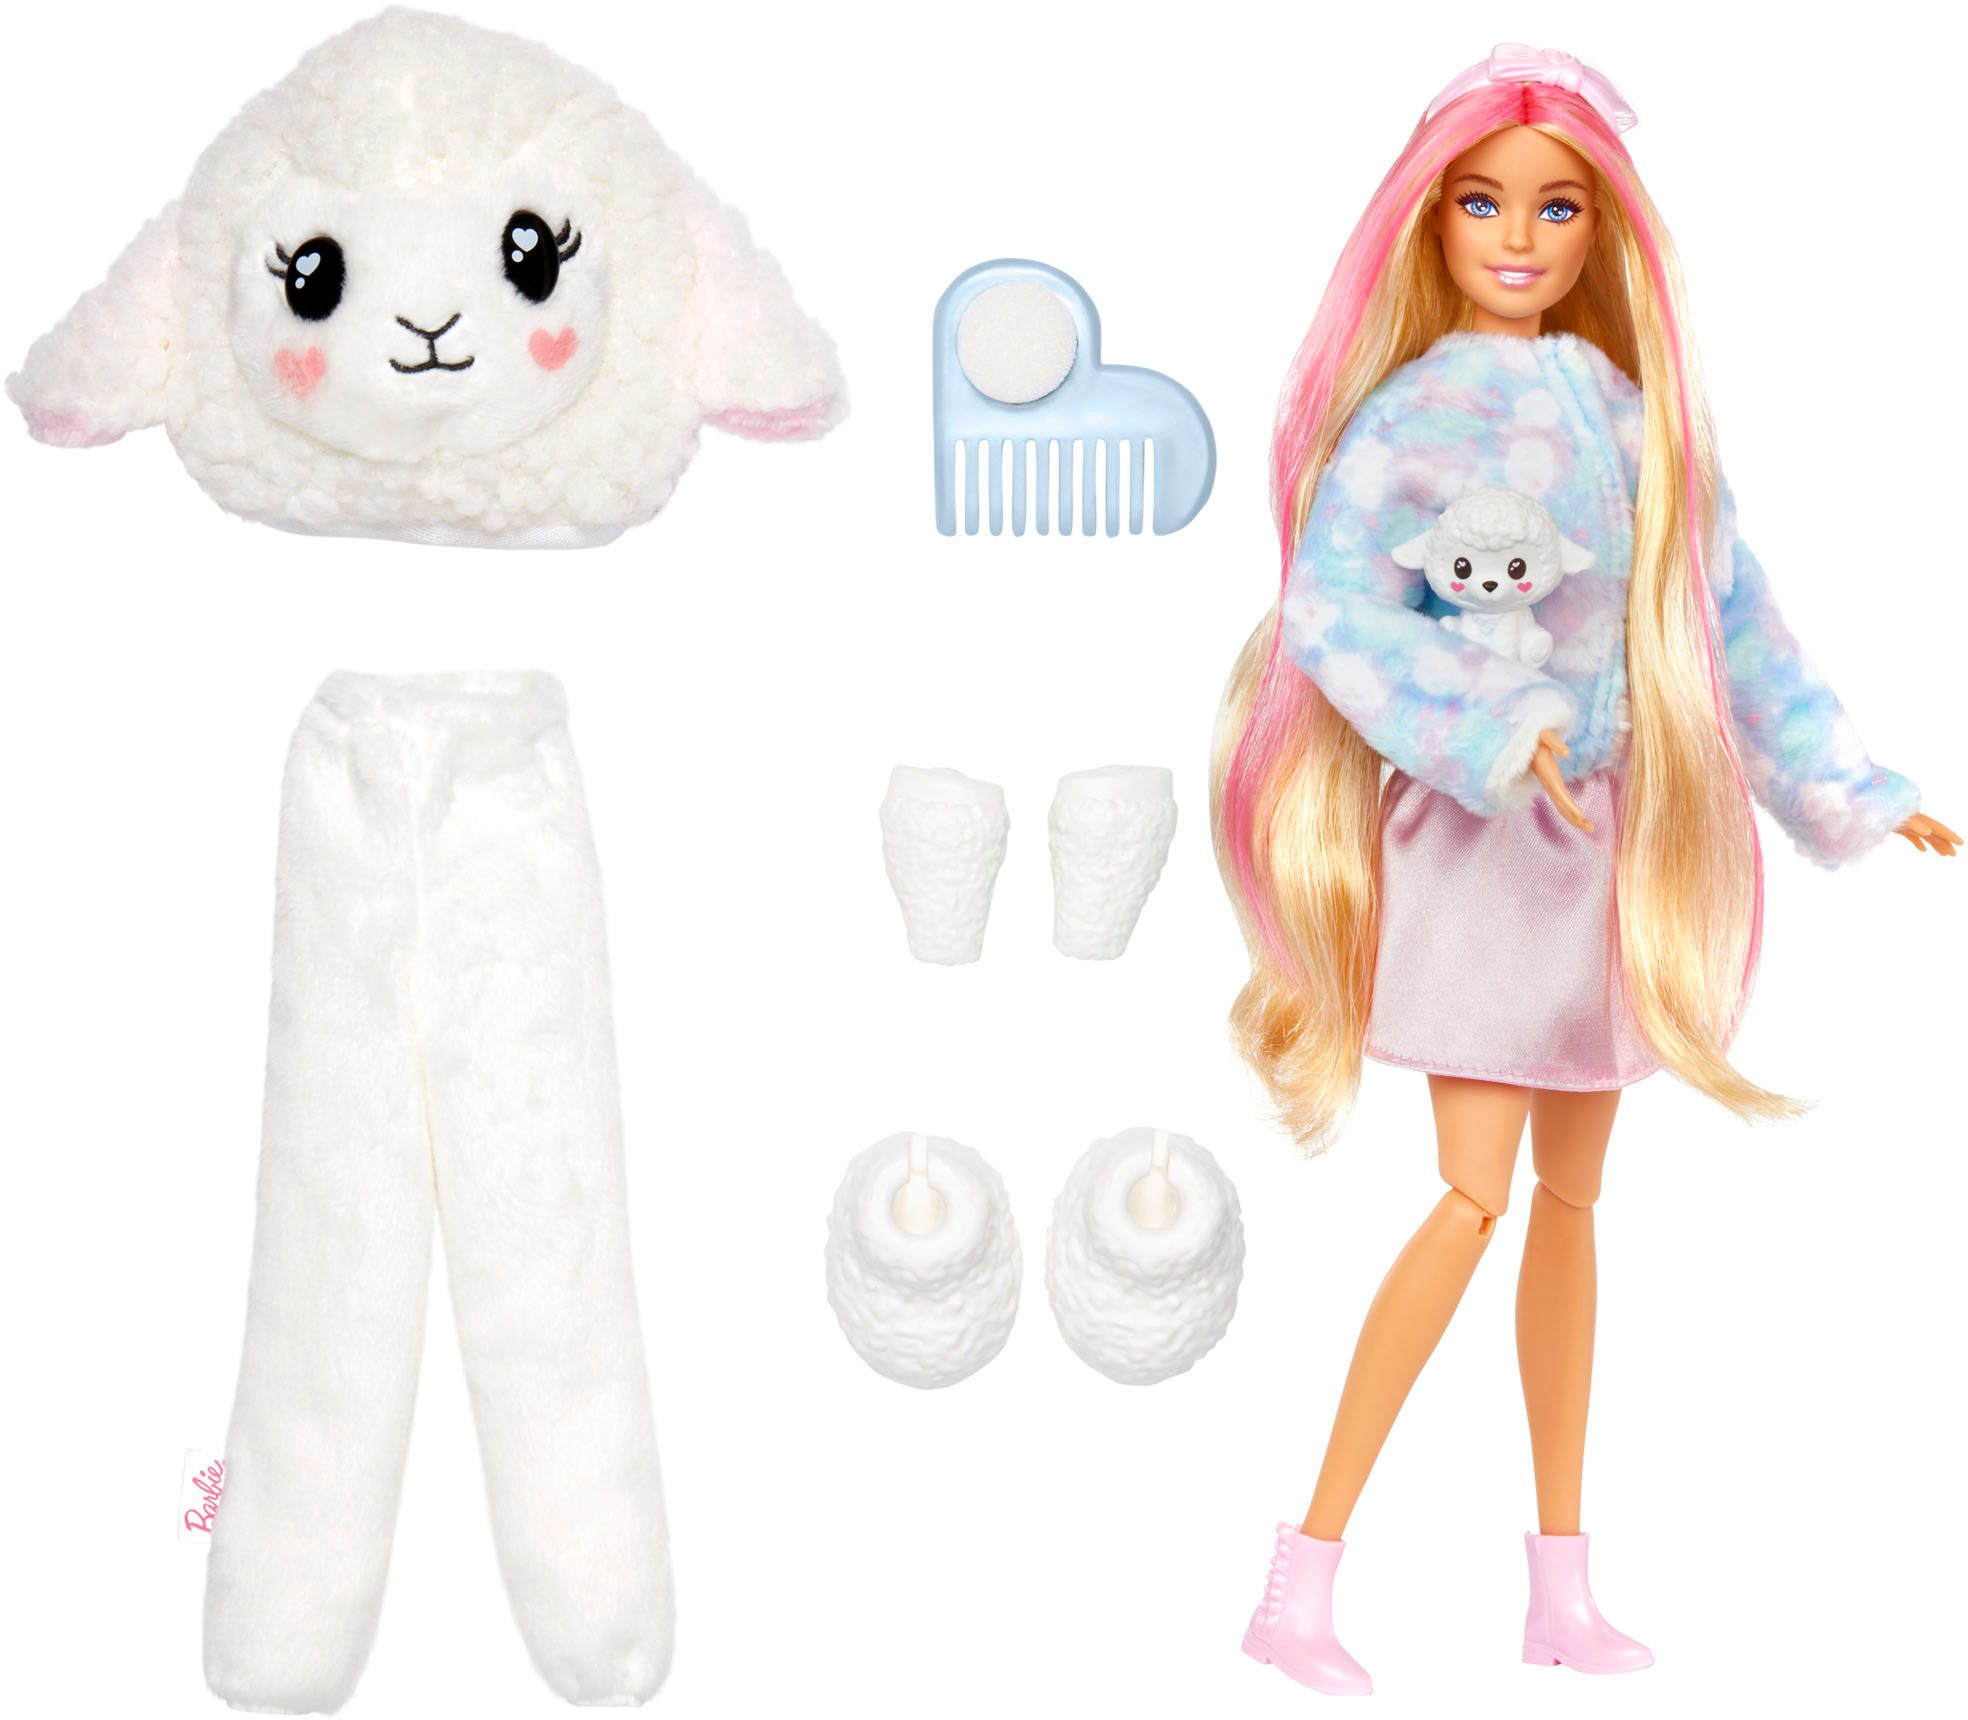 Barbie Small Dolls and Accessories, Cutie Reveal Chelsea Doll with Elephant  Plush Costume & 7 Surprises Including Color Change, Jungle Series